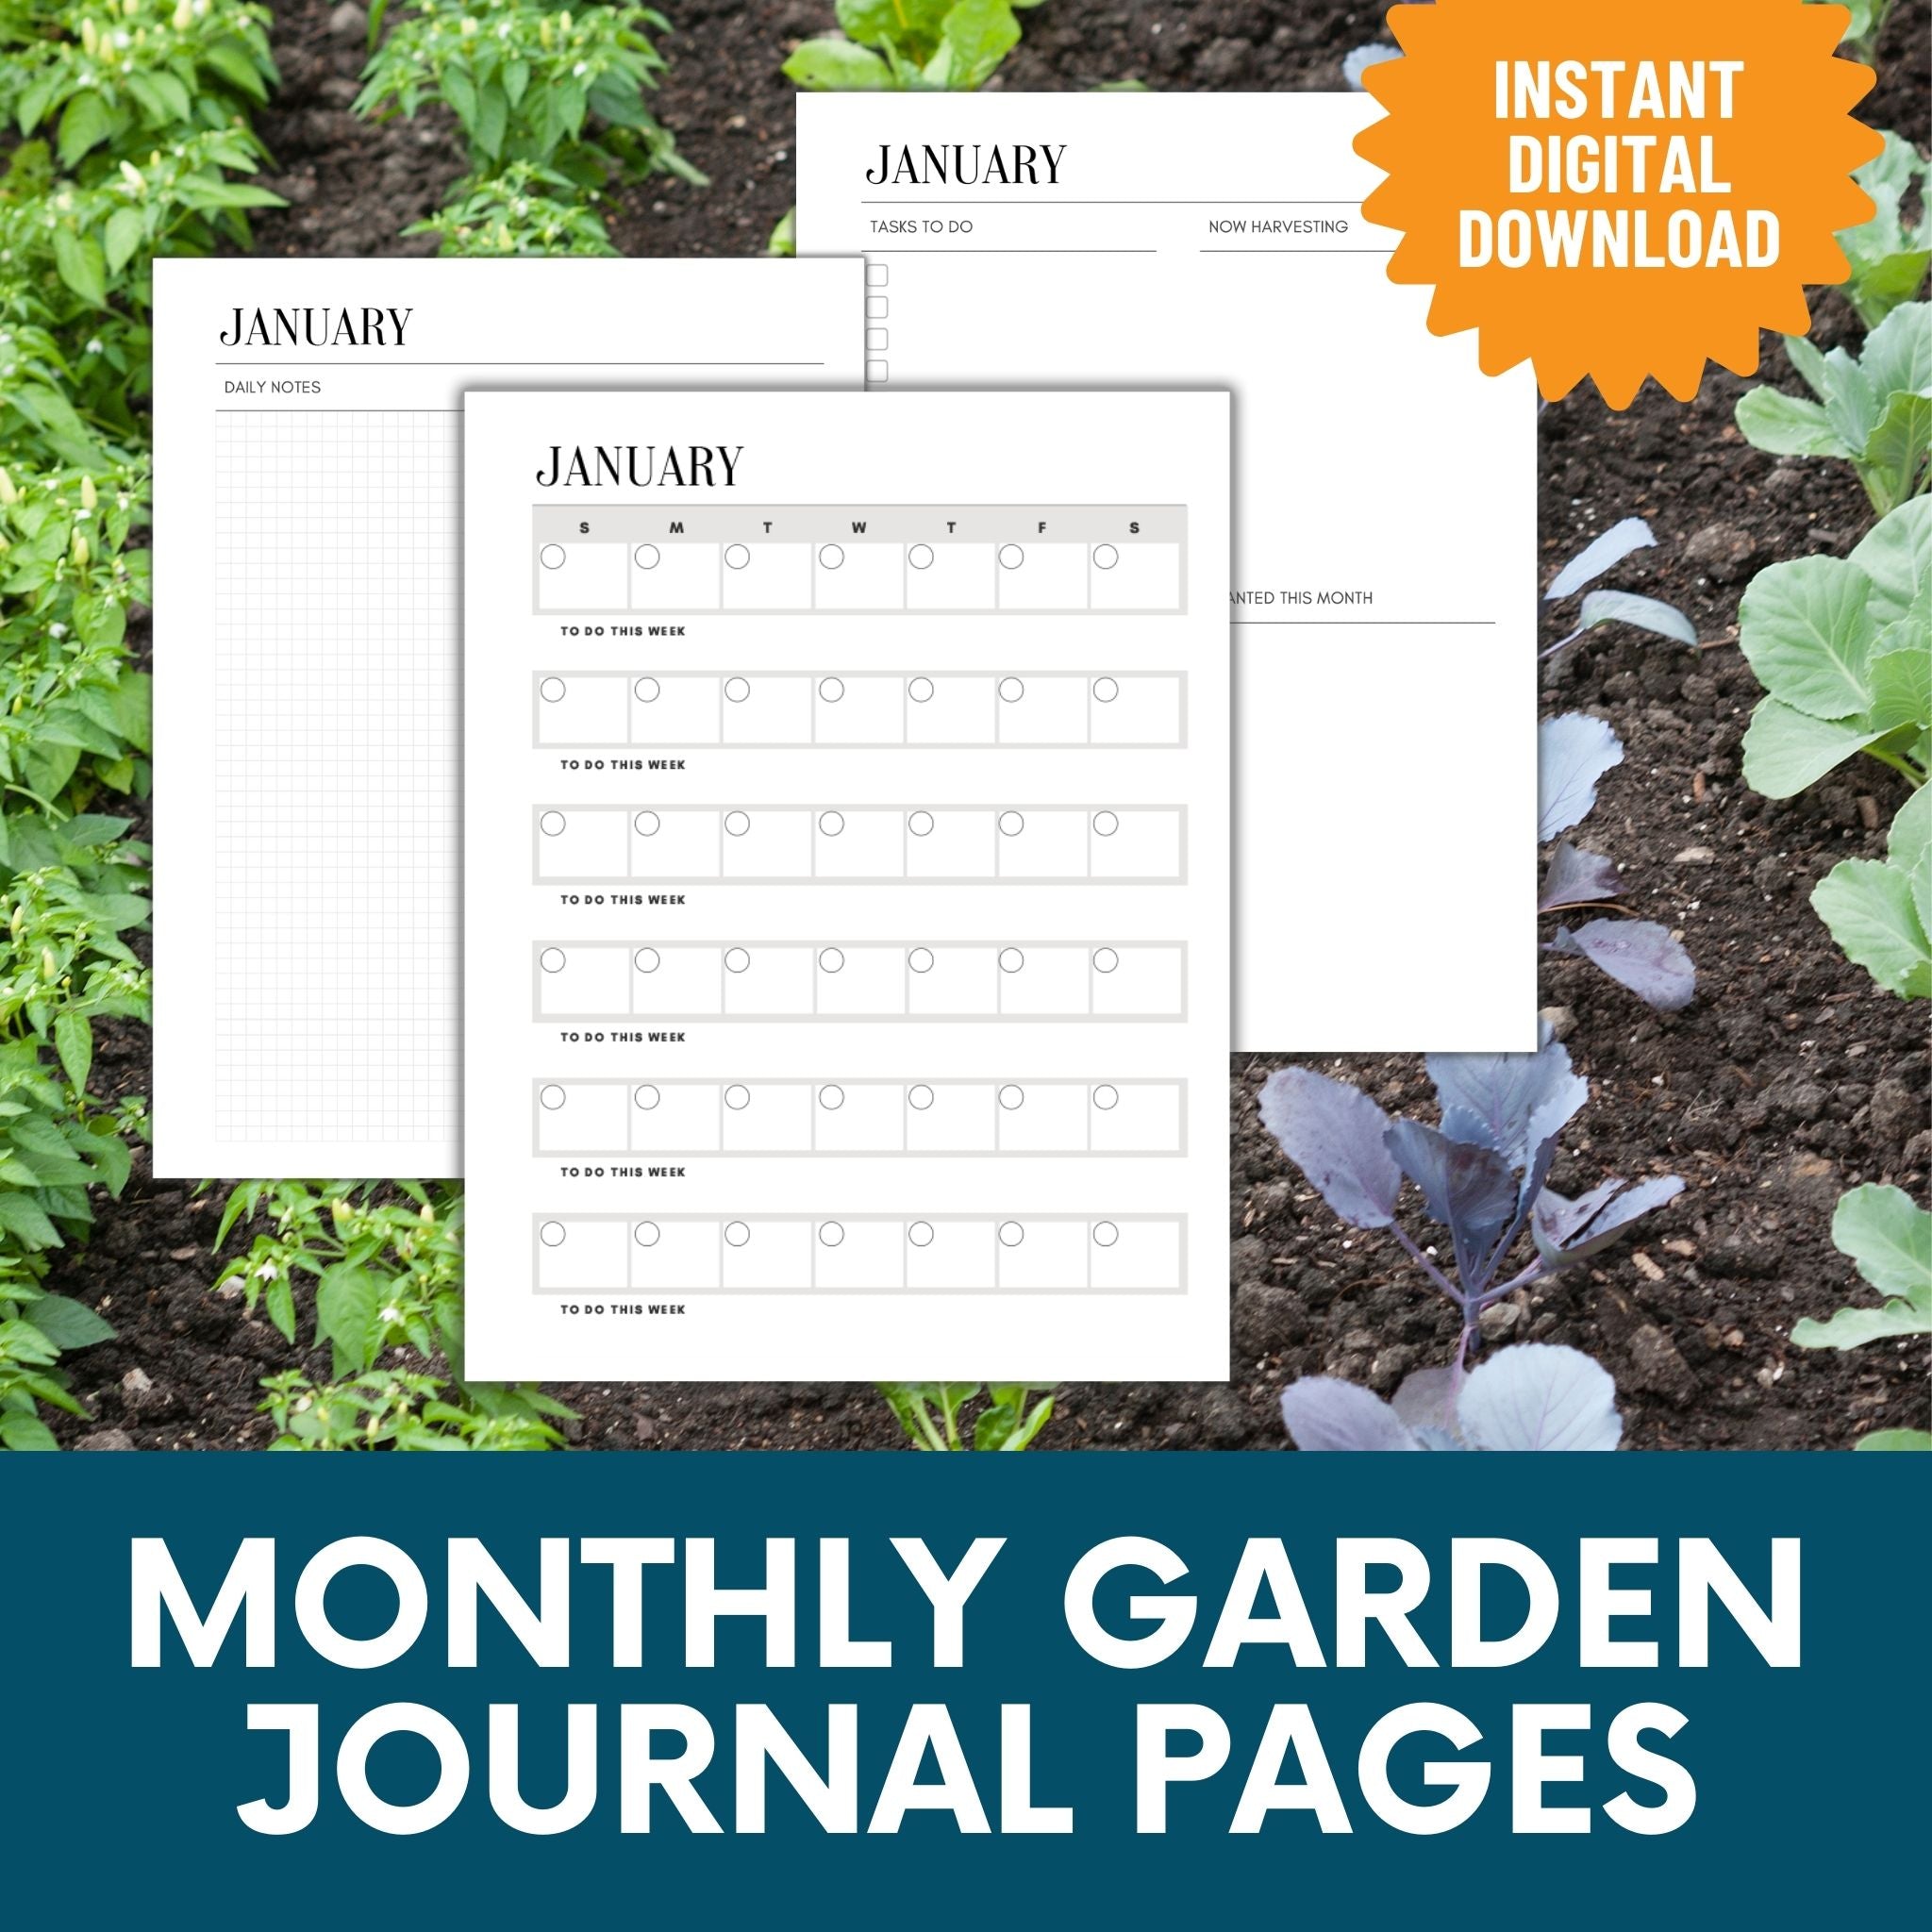 Shows the three monthly garden journal pages for January. An orange starburst reads "Instant Digital Download."